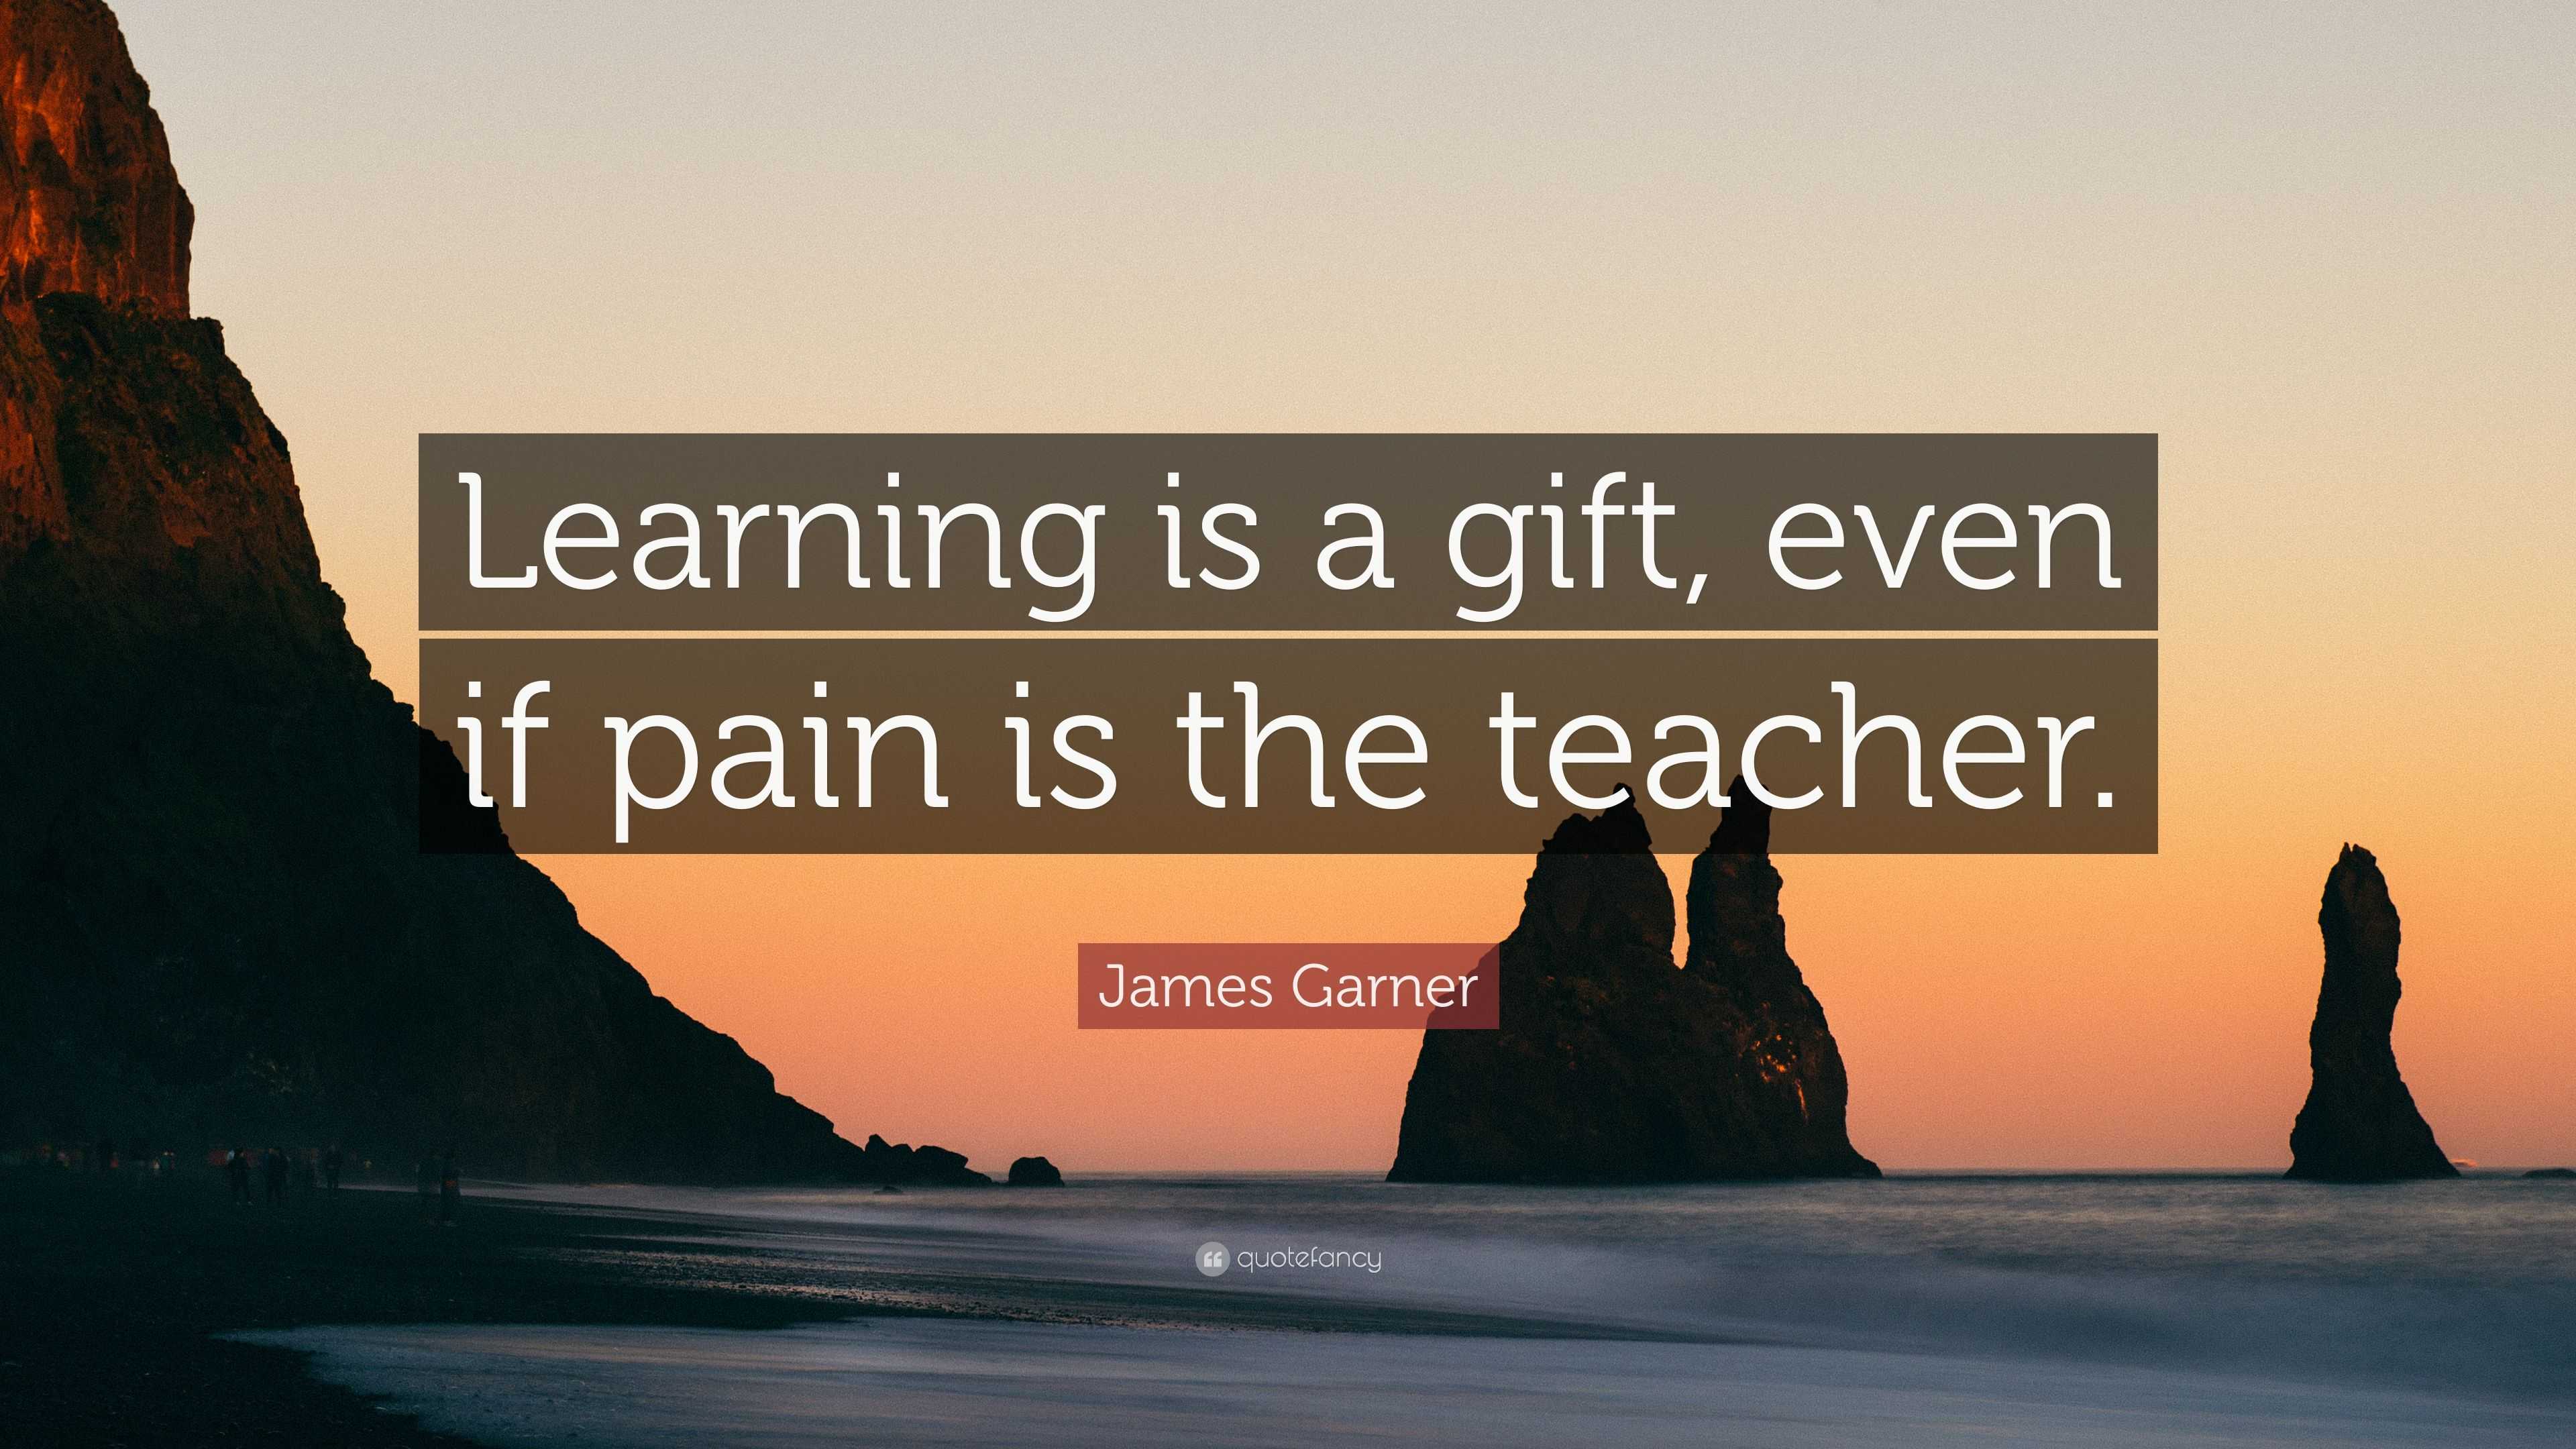 The Daily Life — #learning is a #gift when #pain is your #teacher..